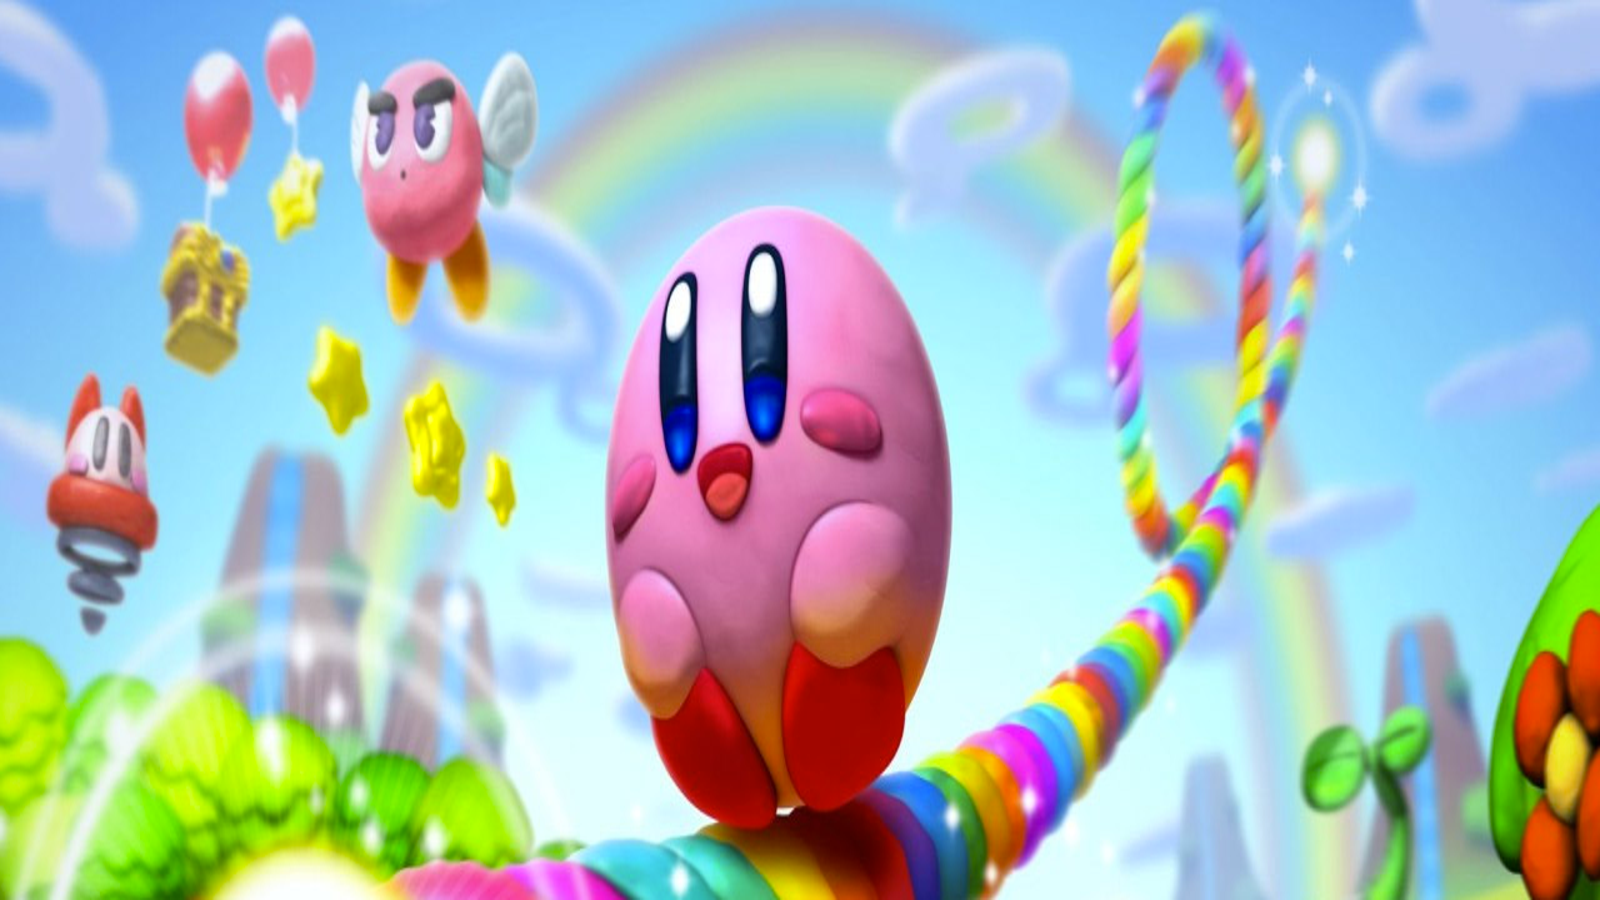 Digital Foundry examines Kirby and the Forgotten Land - My